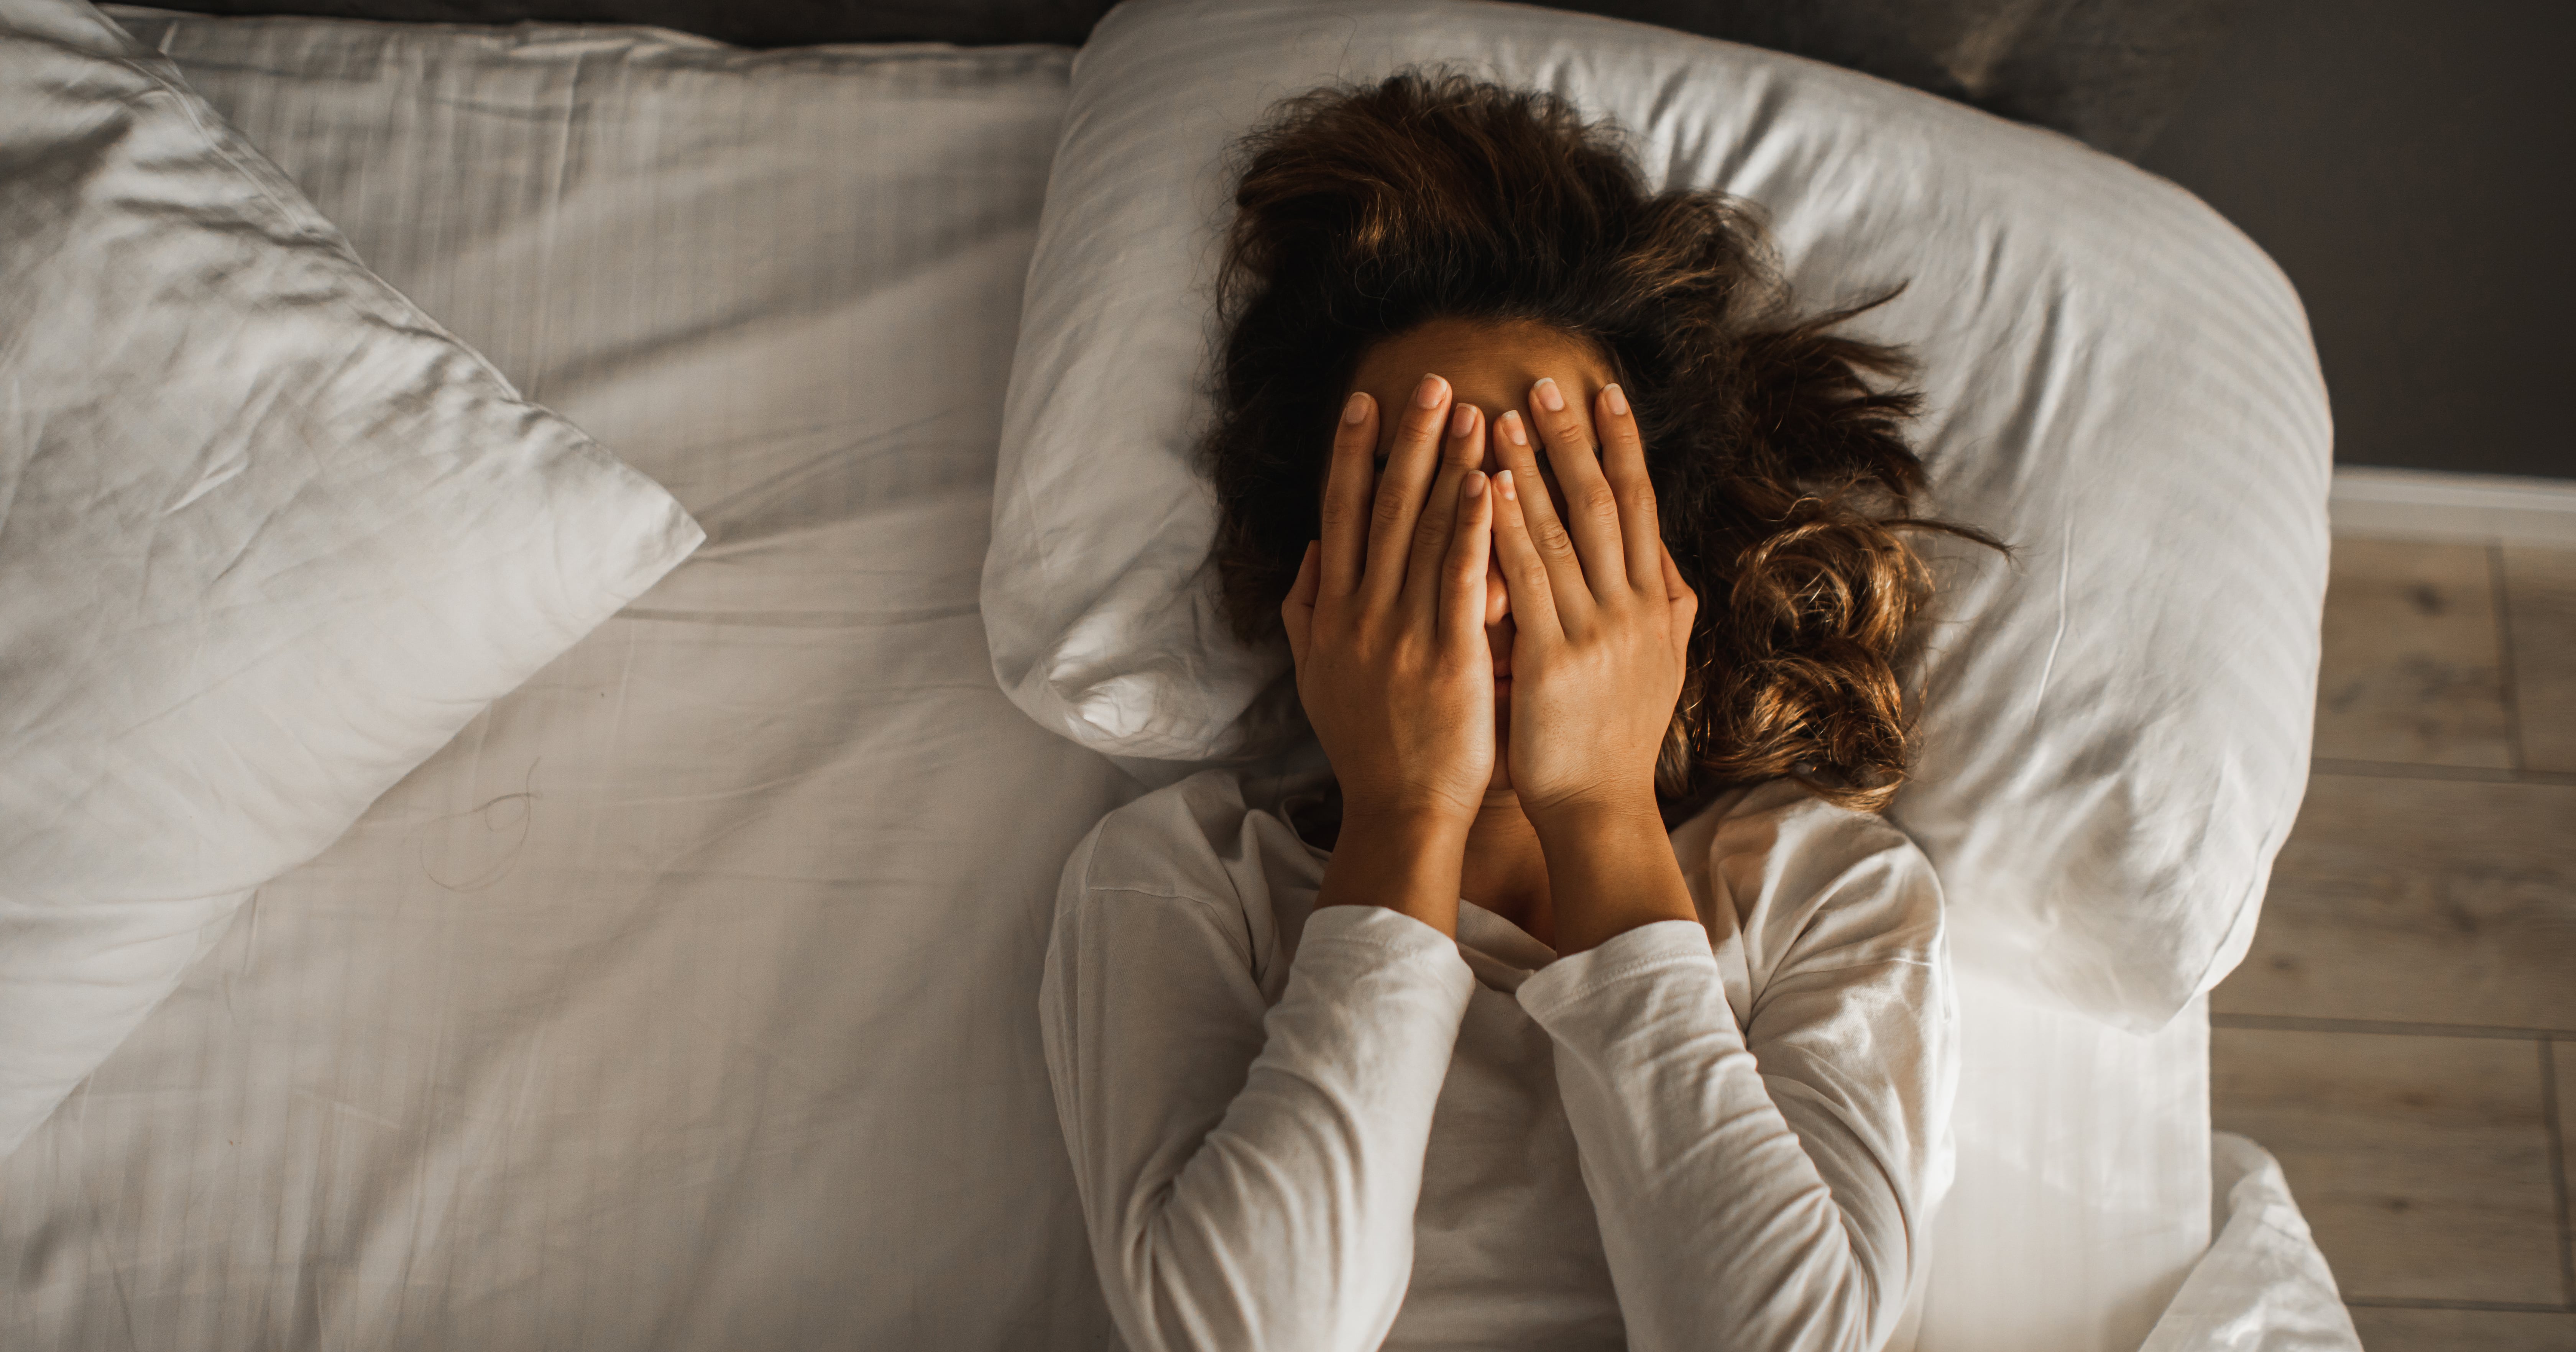 Can Magnesium Really Help You Sleep? We Asked 2 MDs